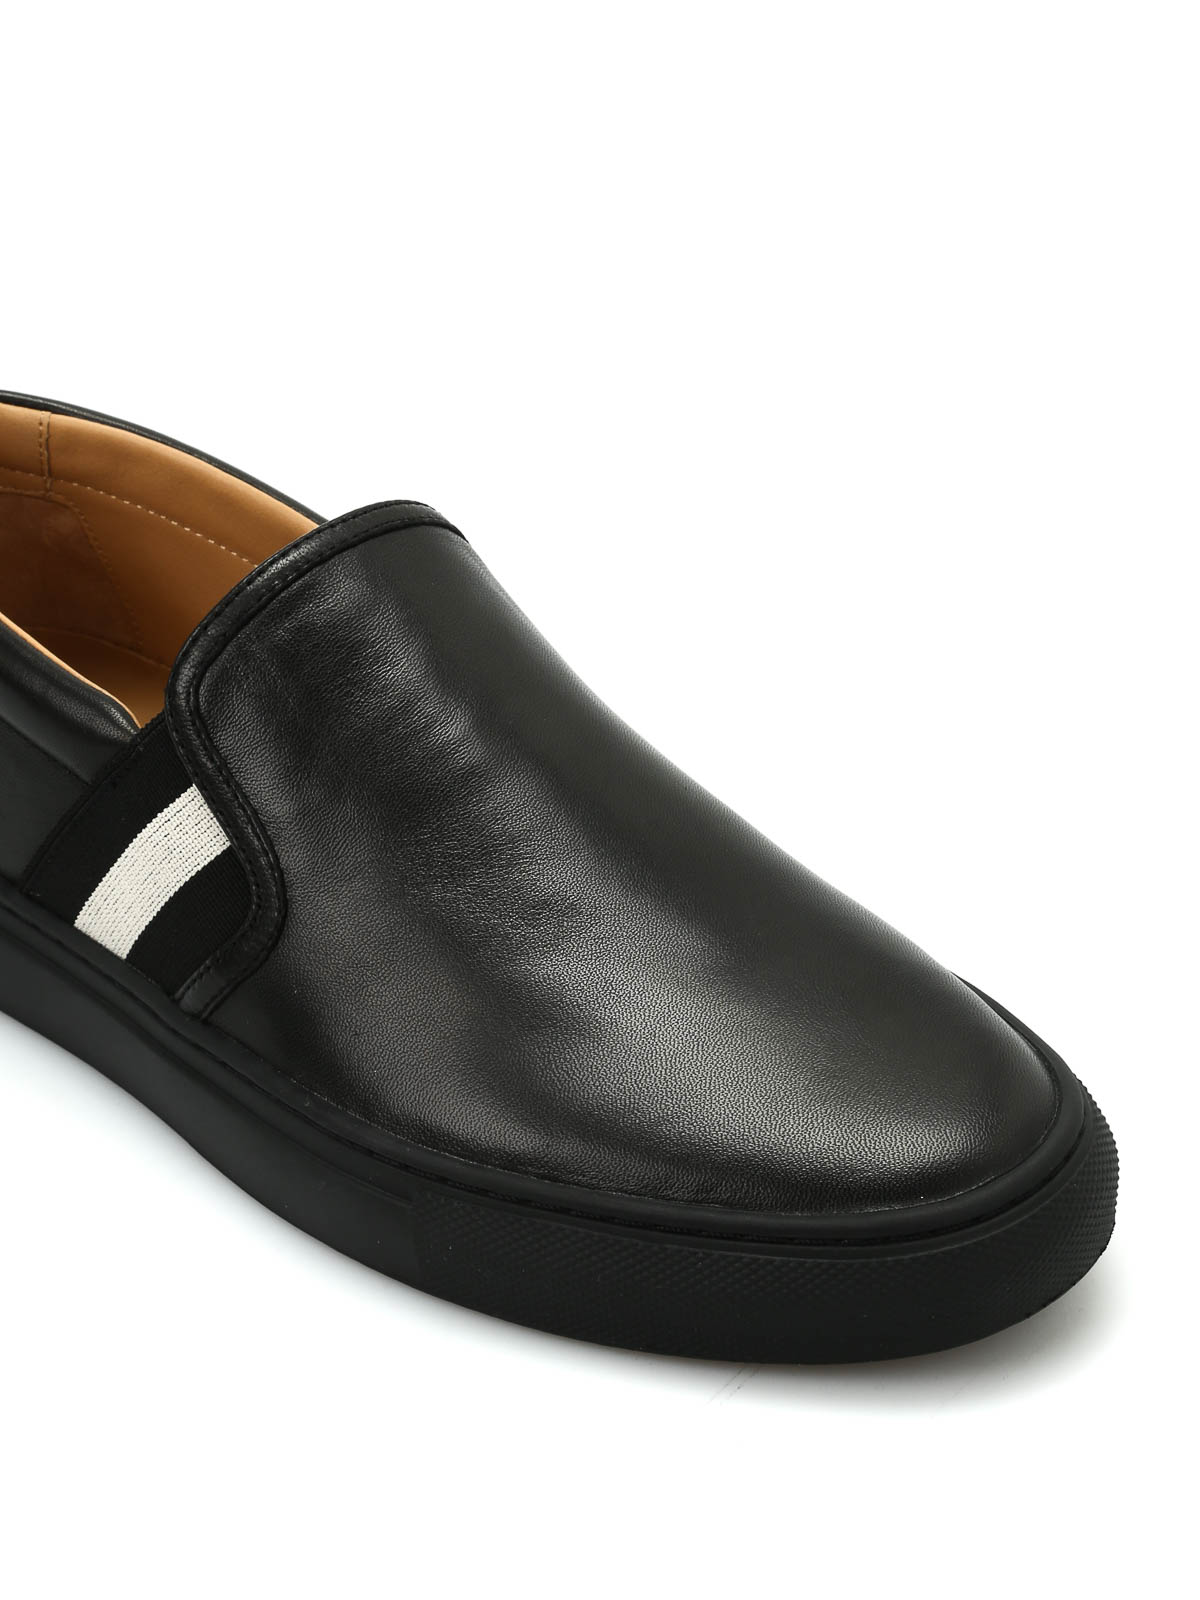 Bally - Leather striped slip-ons 